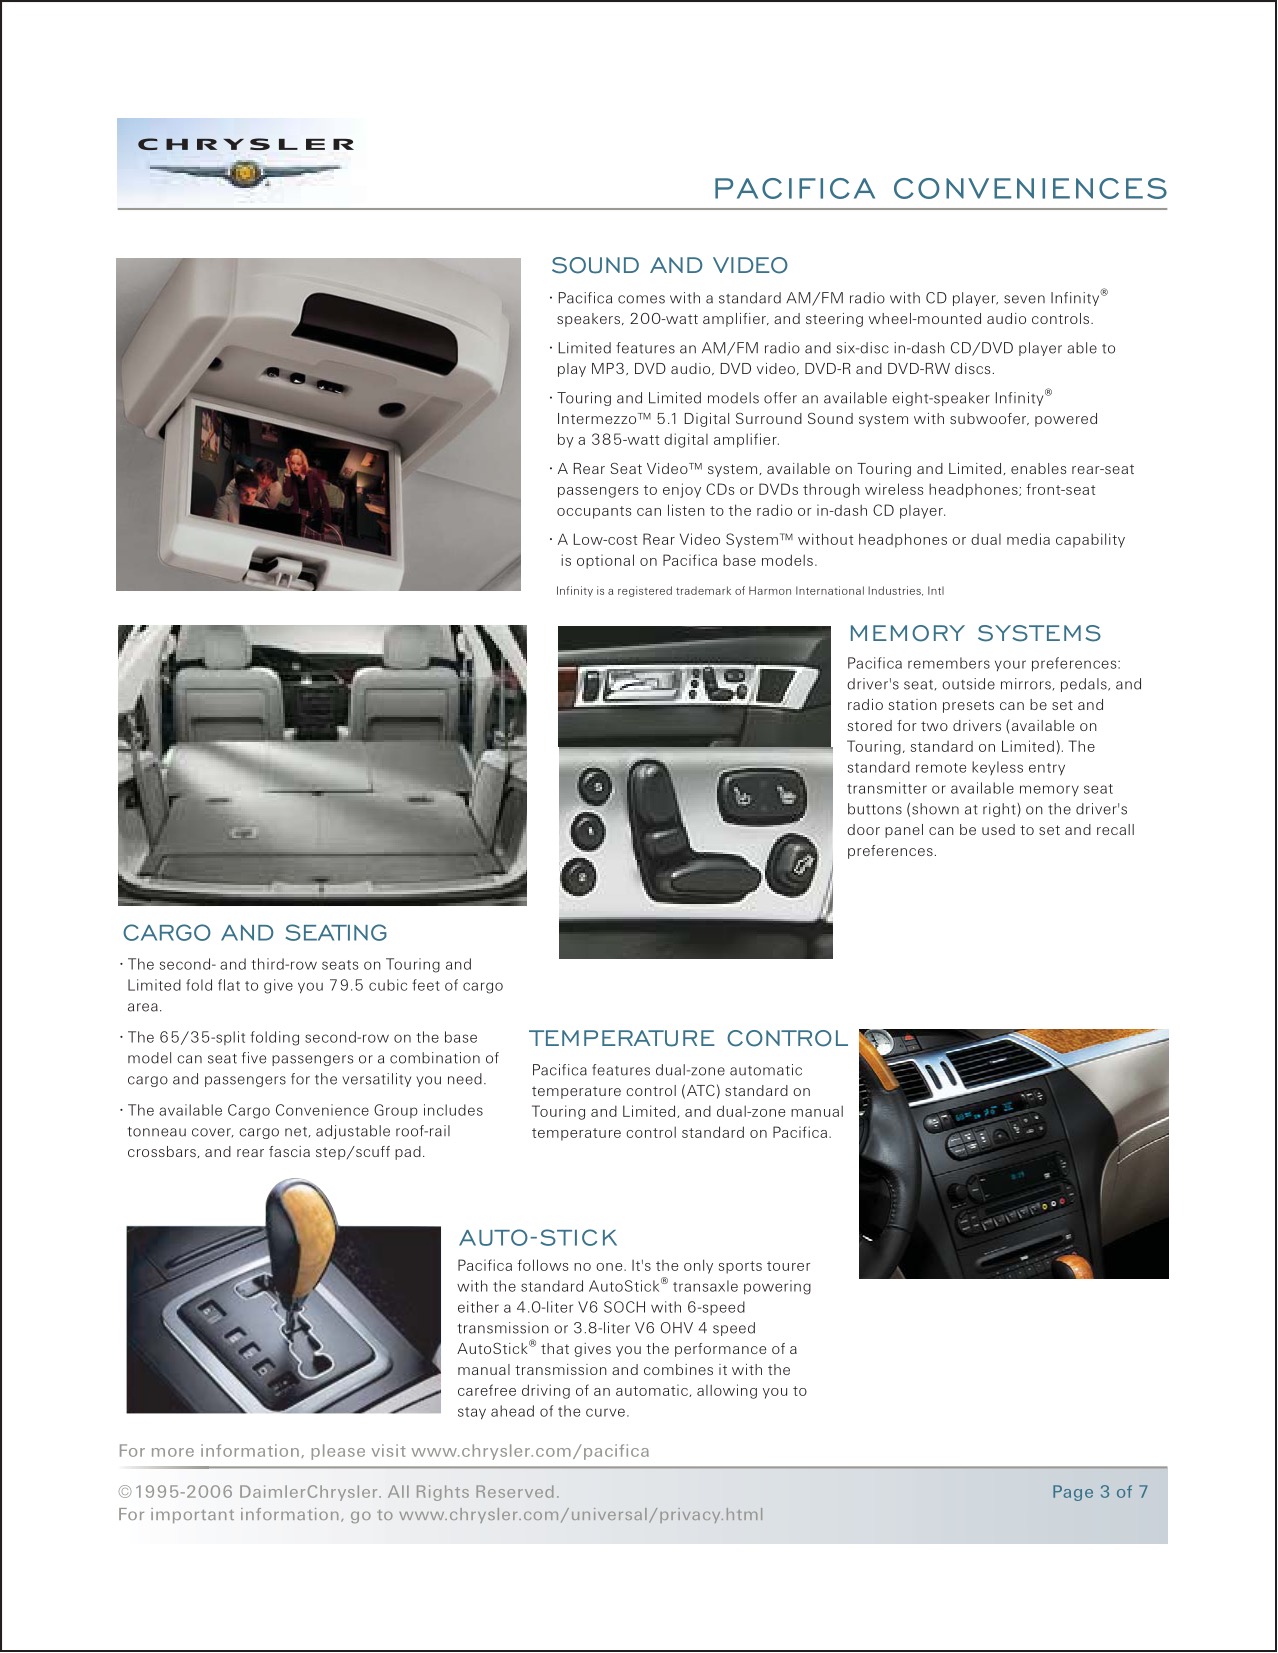 2007 Chrysler Pacifica Brochure Page 3